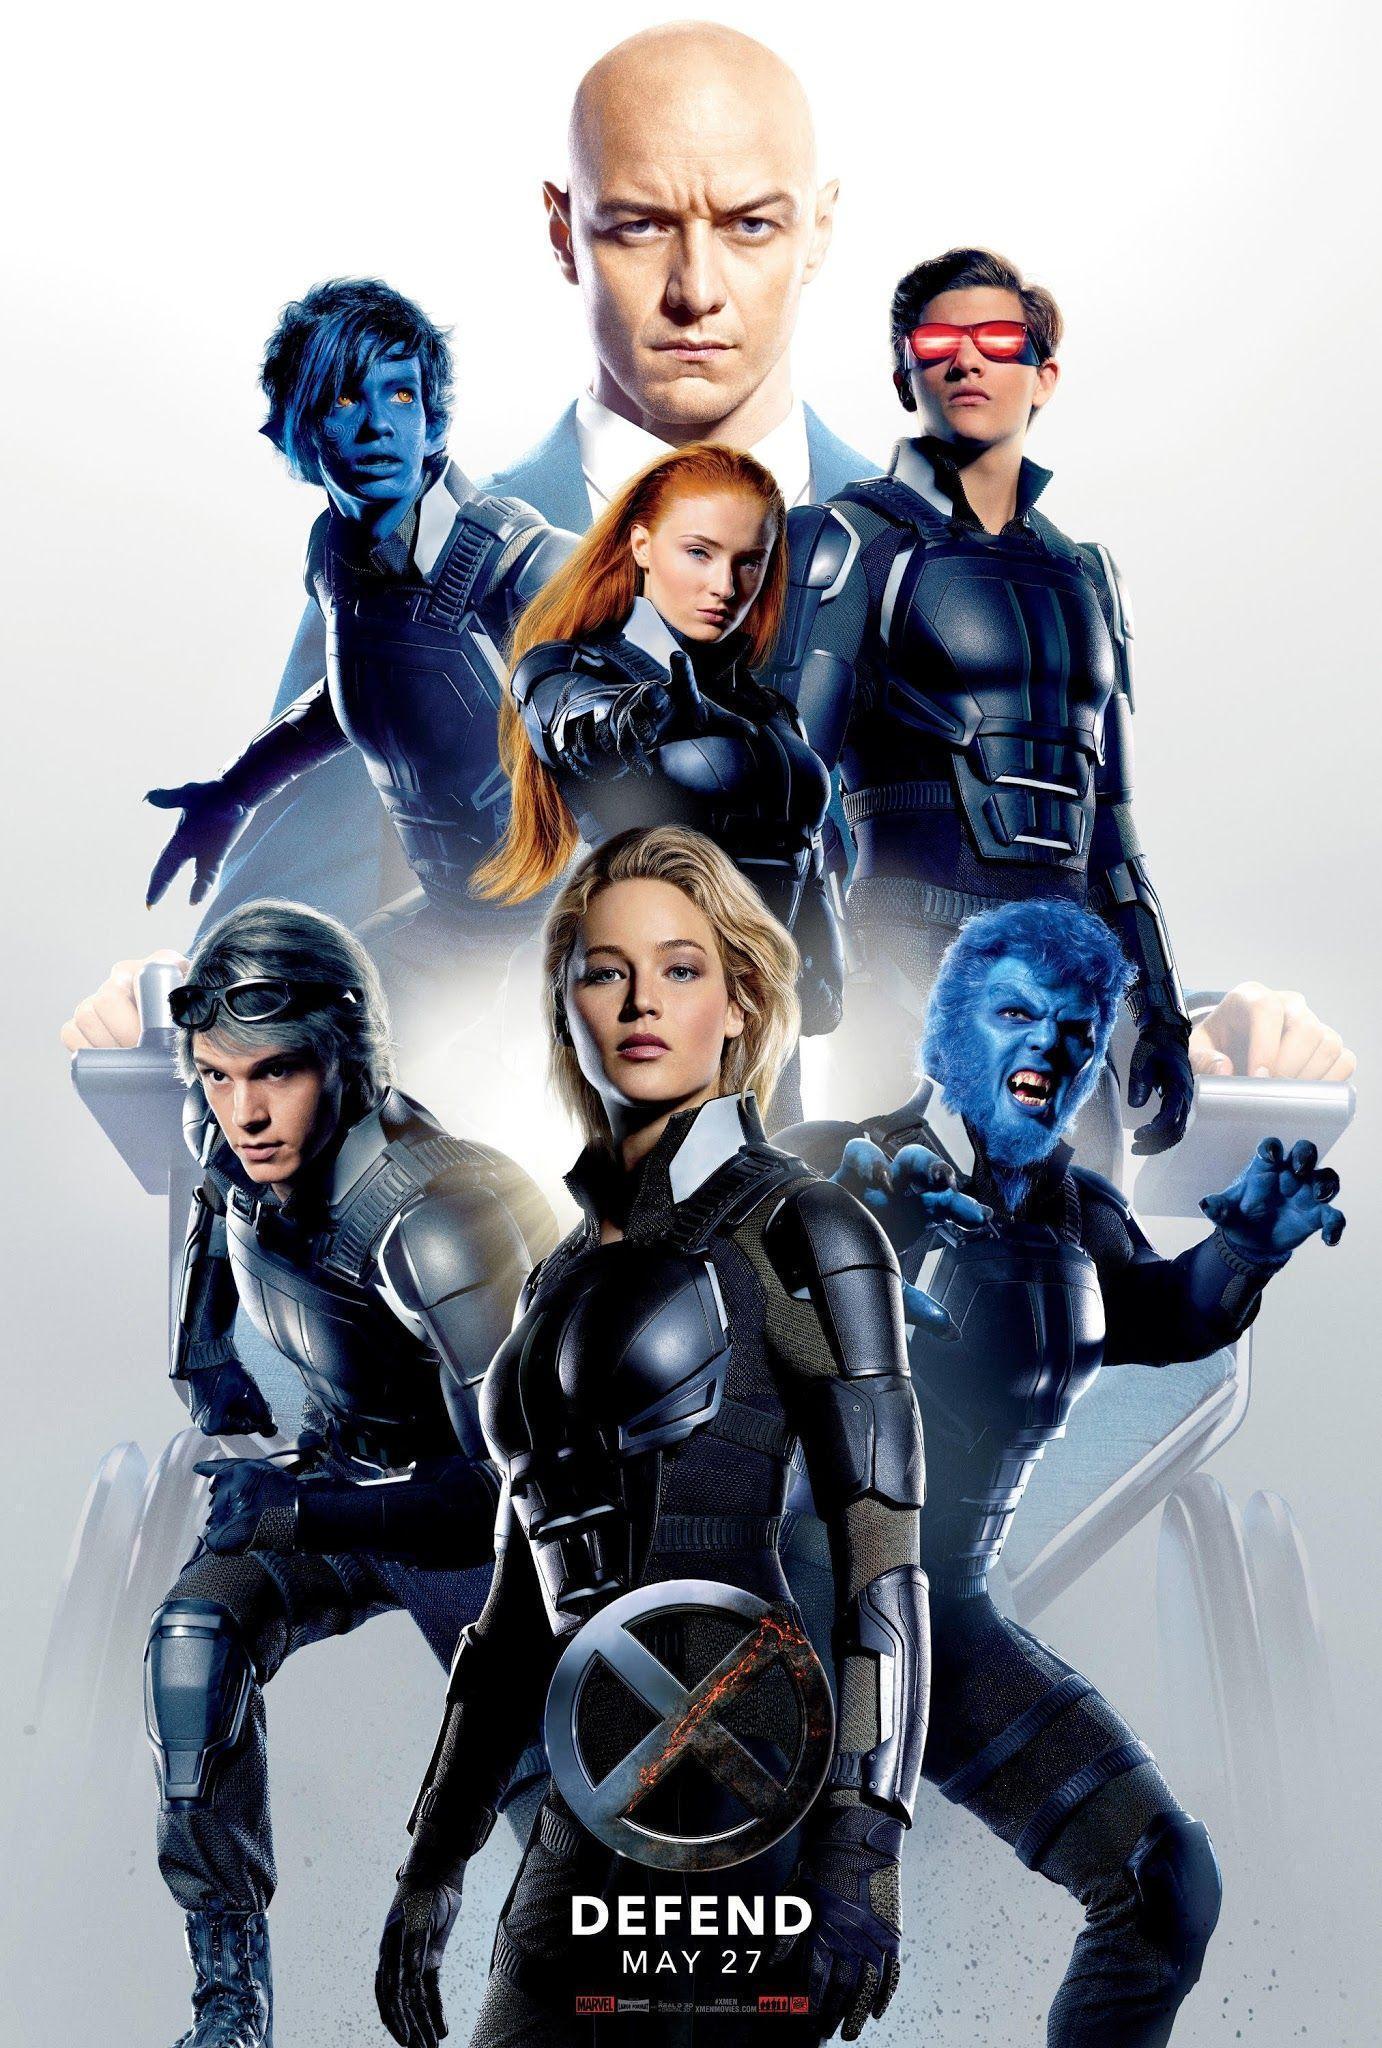 Jennifer Lawrence Is Ruining The New X Men Movie For Me